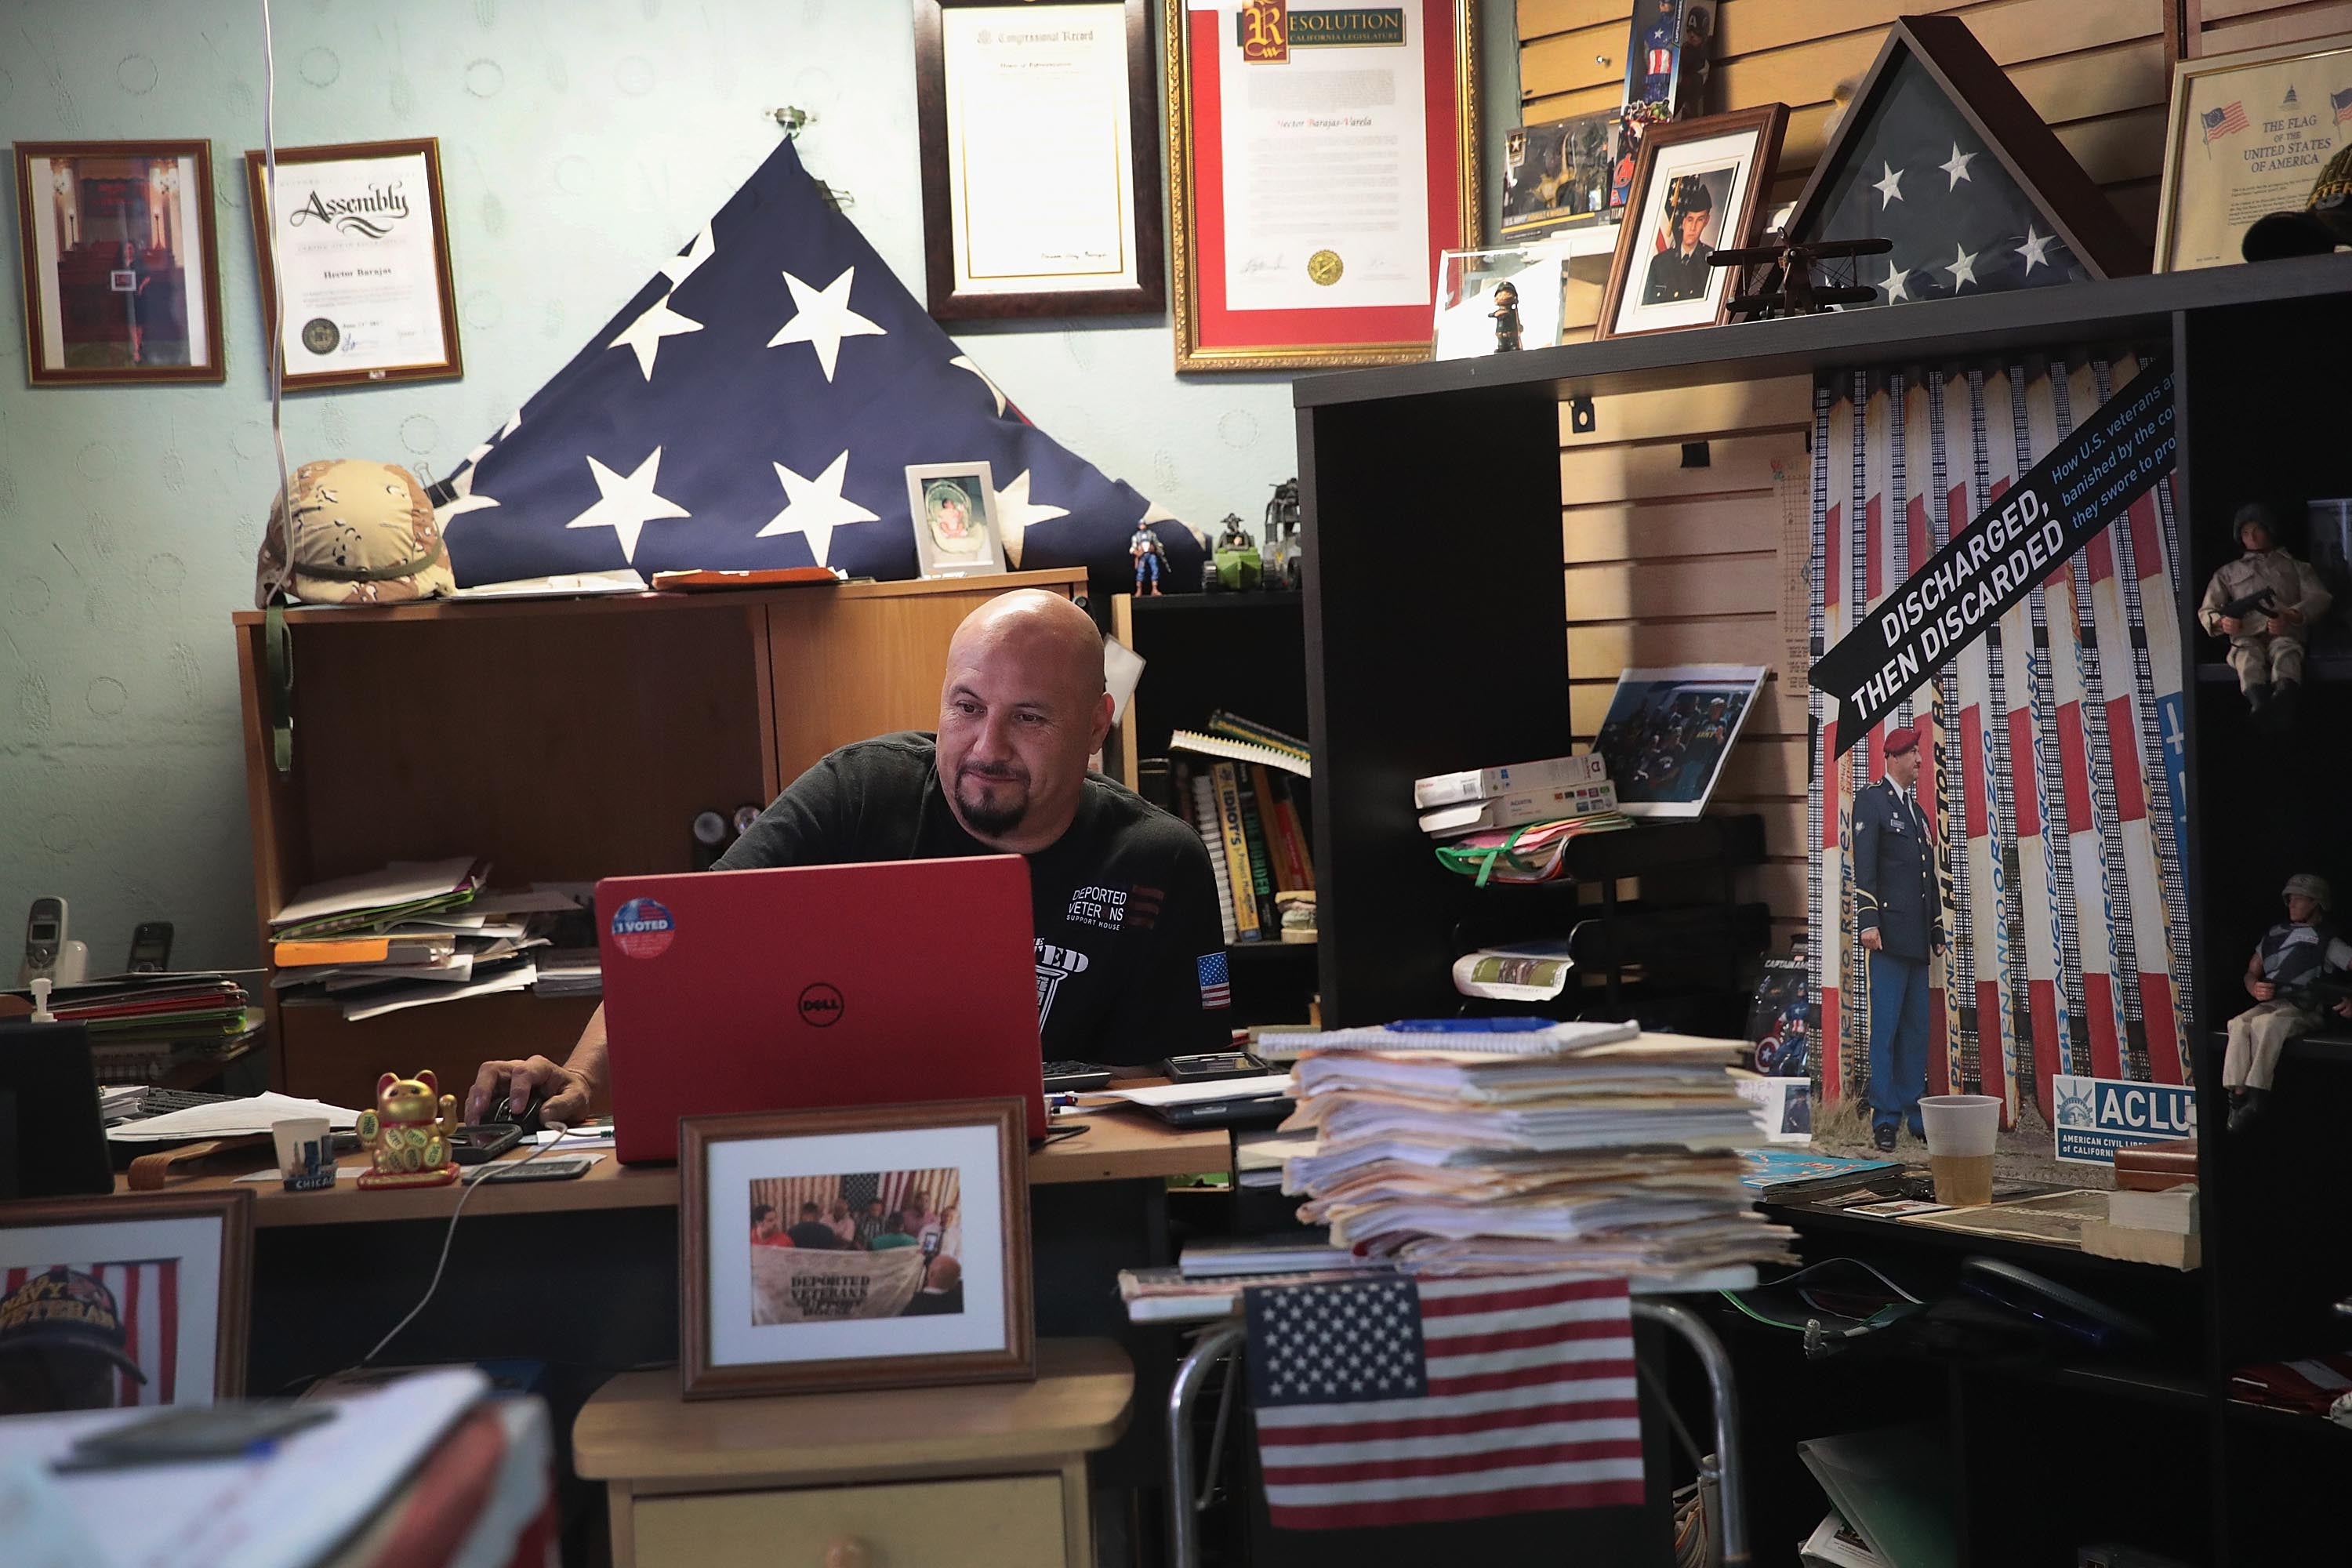 Hector Barajas, who founded and runs Deported Veterans Support House, works in his office on January 28, 2019 in Tijuana, Mexico